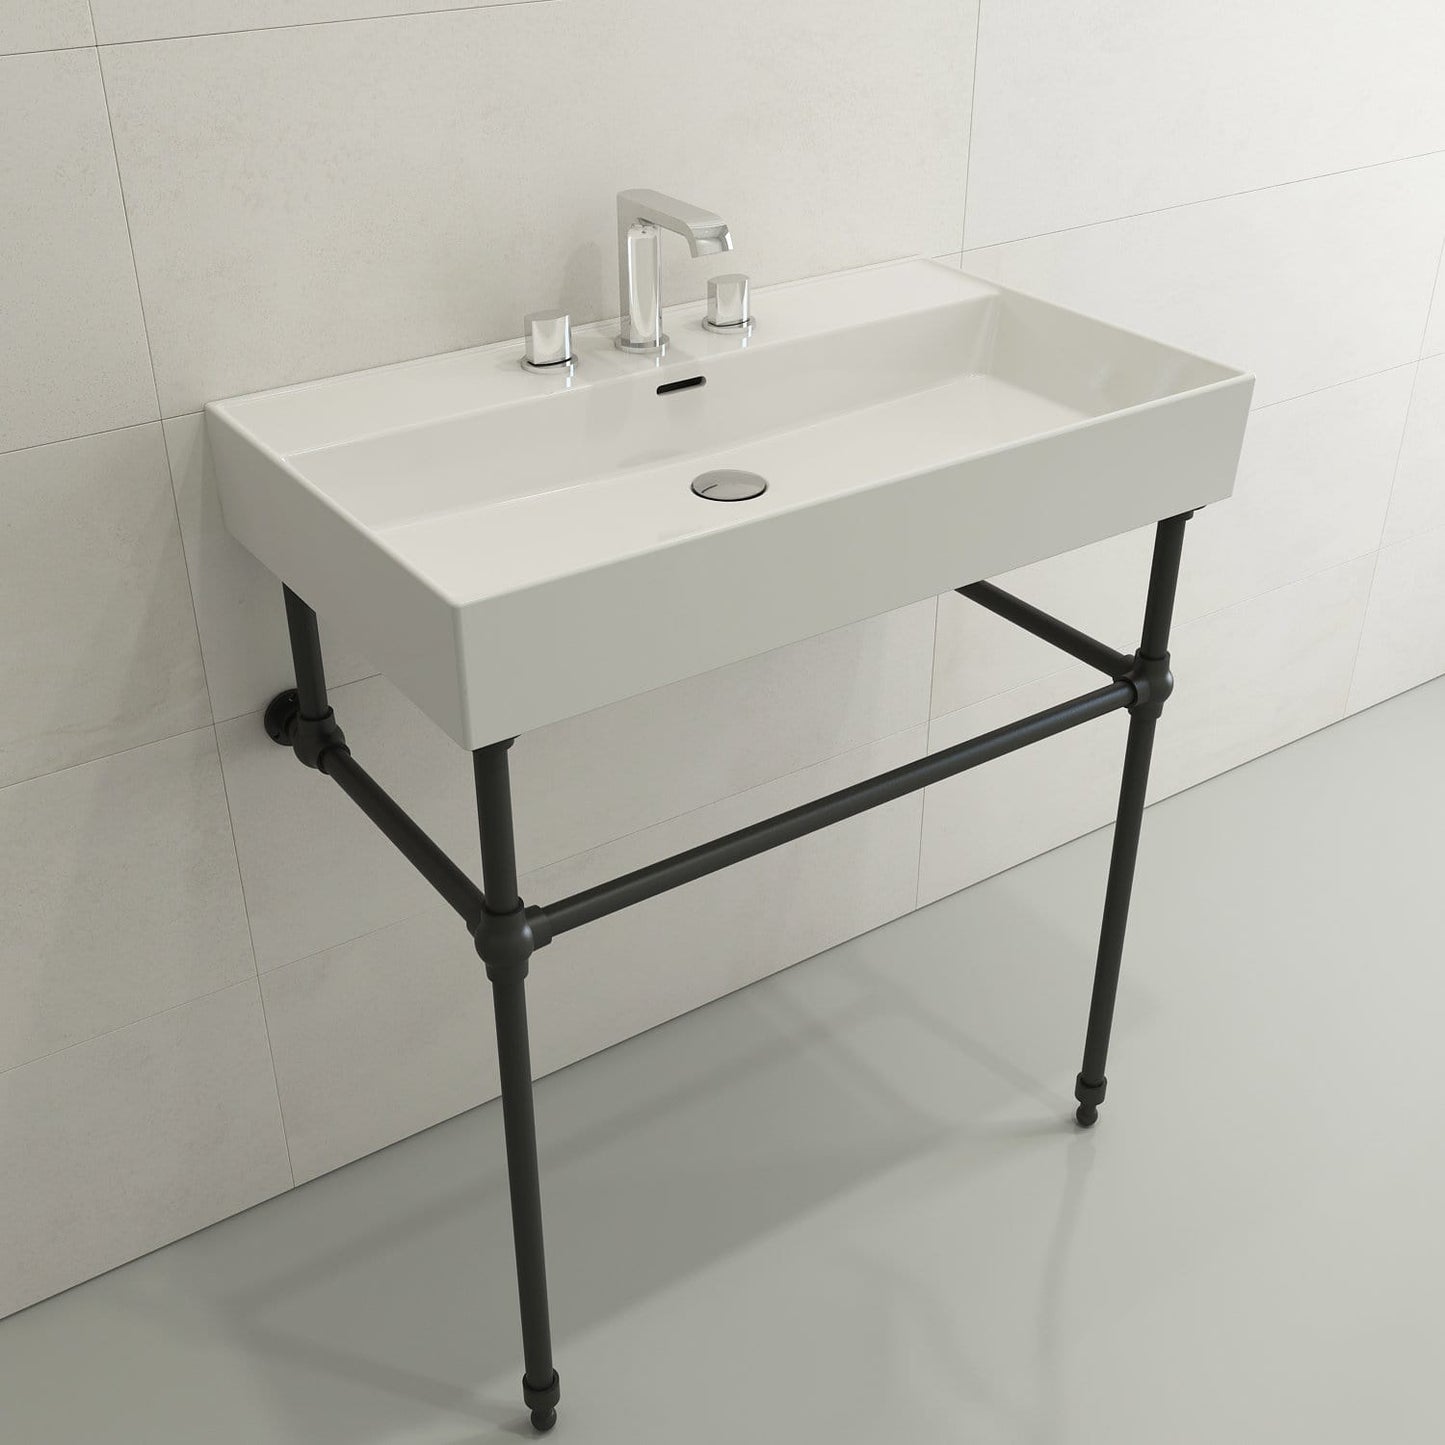 BOCCHI MILANO 32" Wall-Mounted Sink Fireclay 3-Hole With Overflow